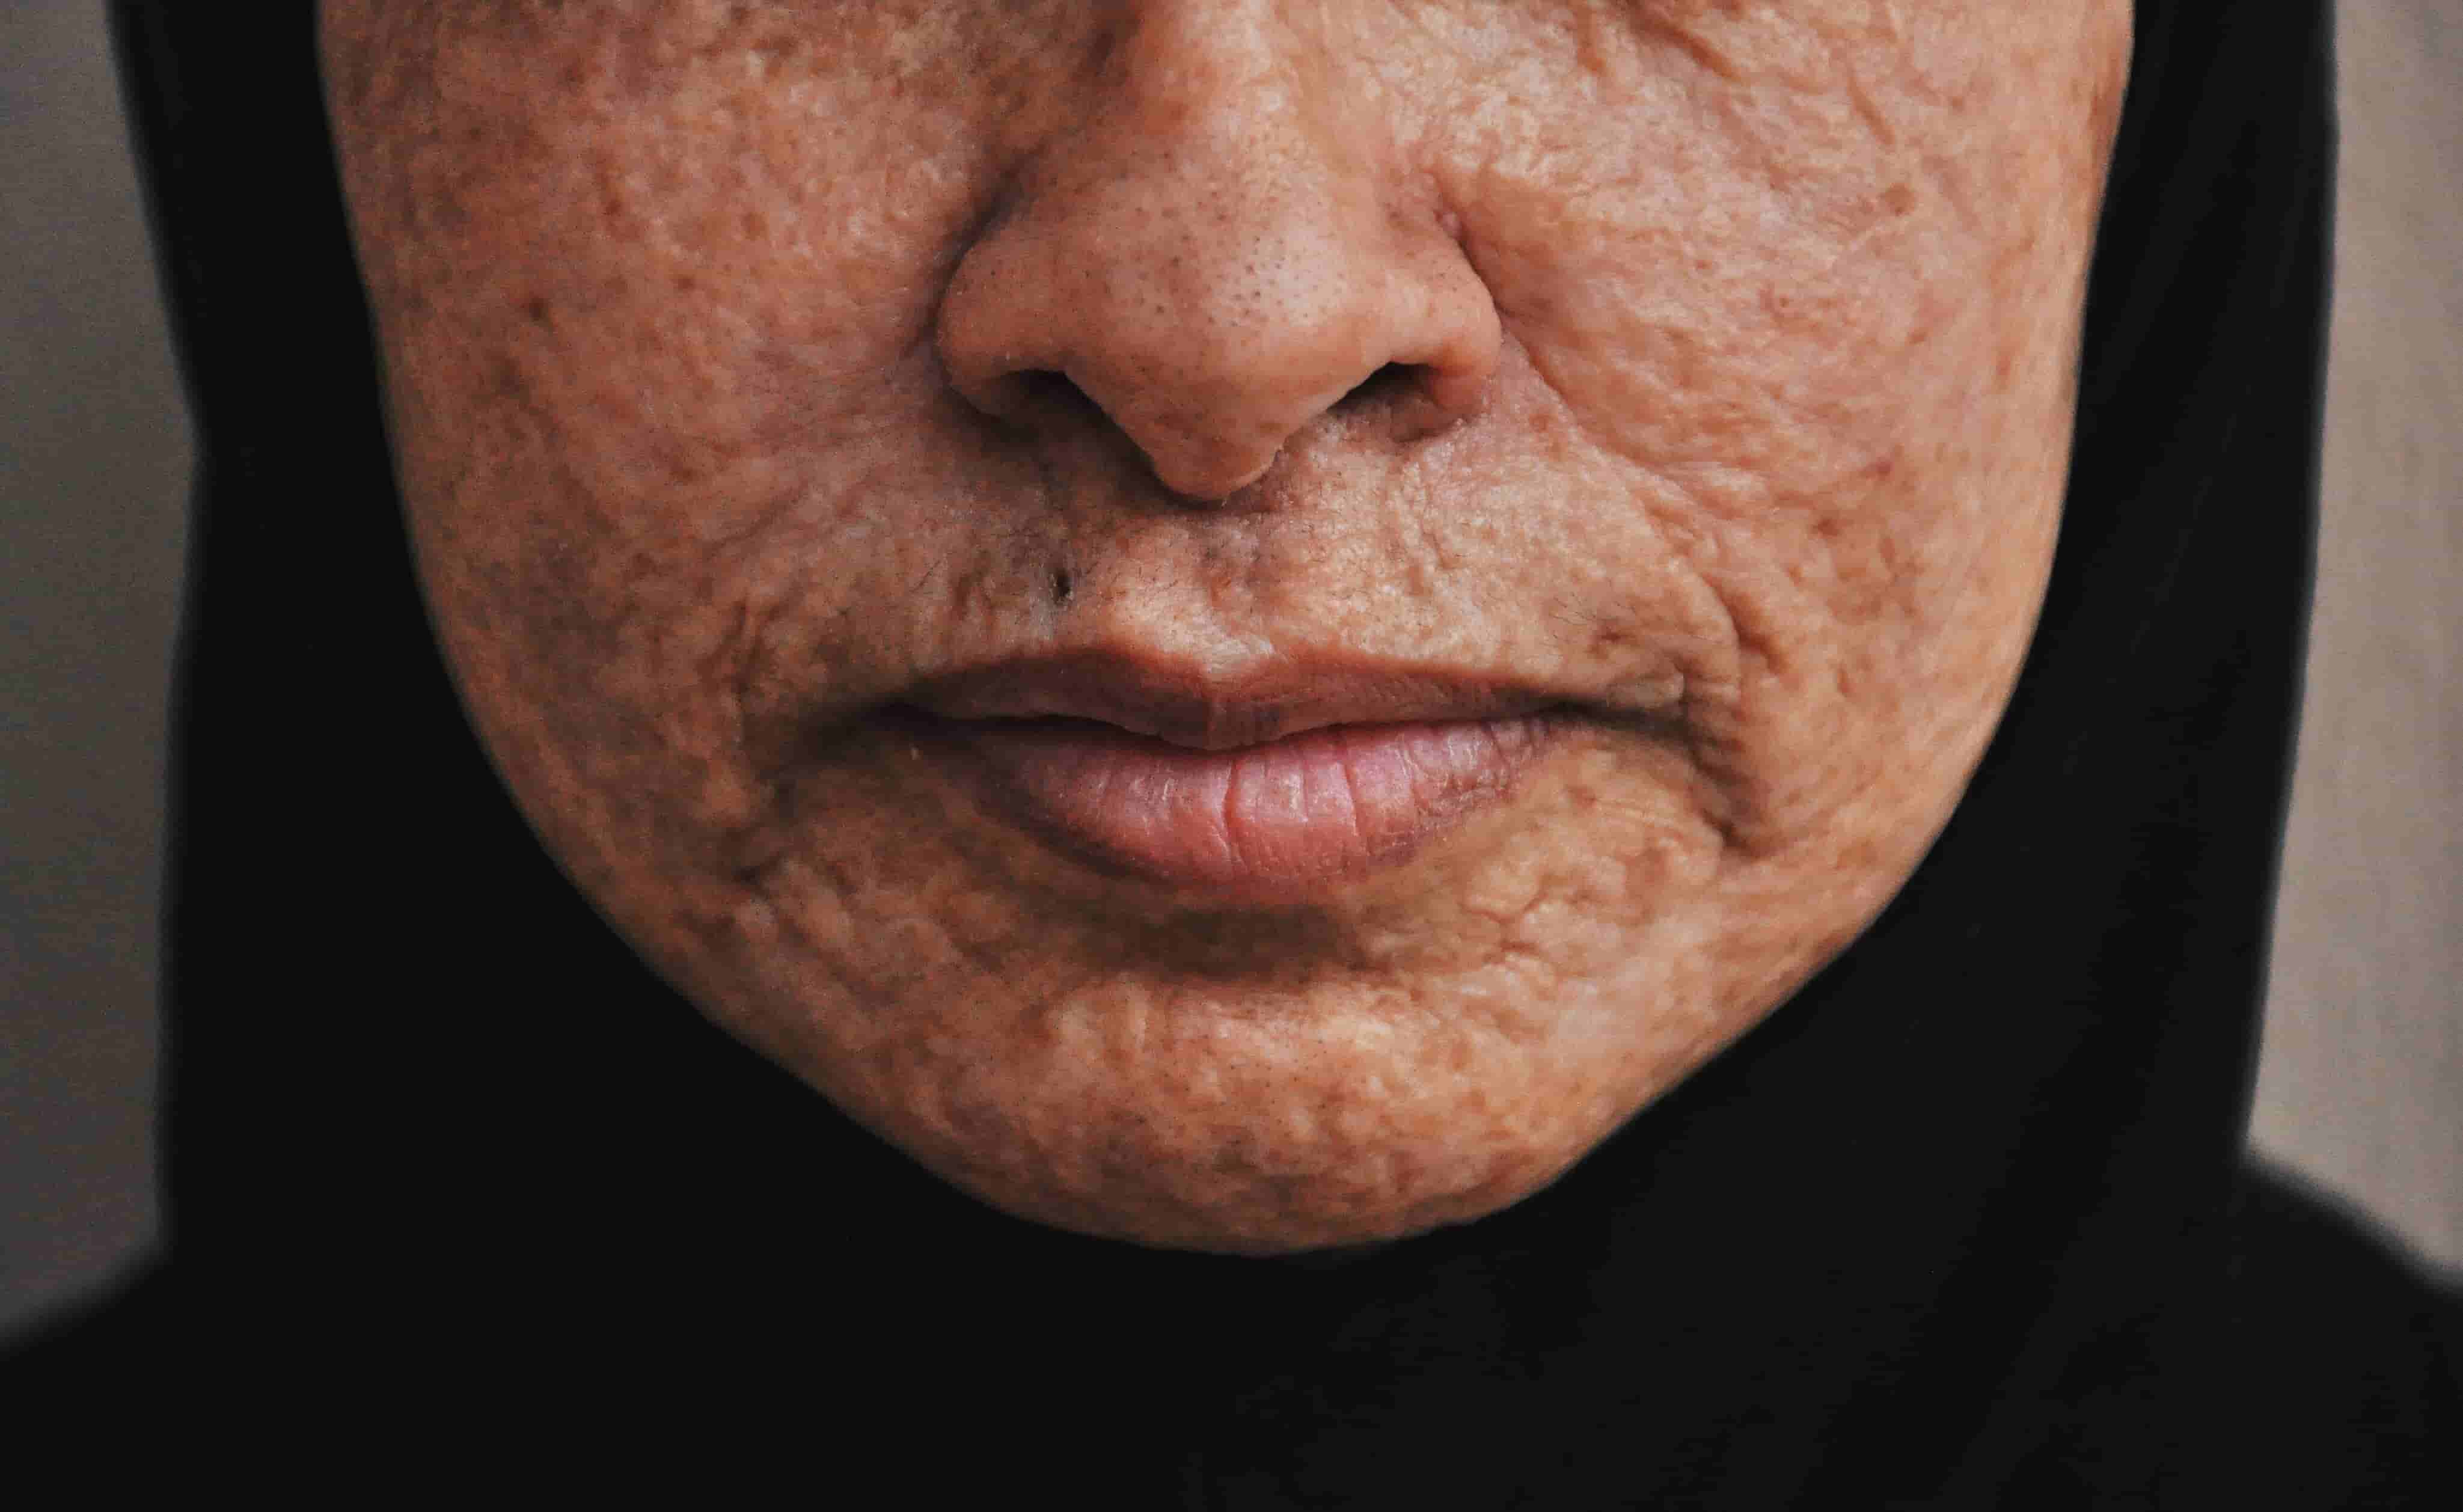 Acne left untreated can possibly end up as permanent scars.